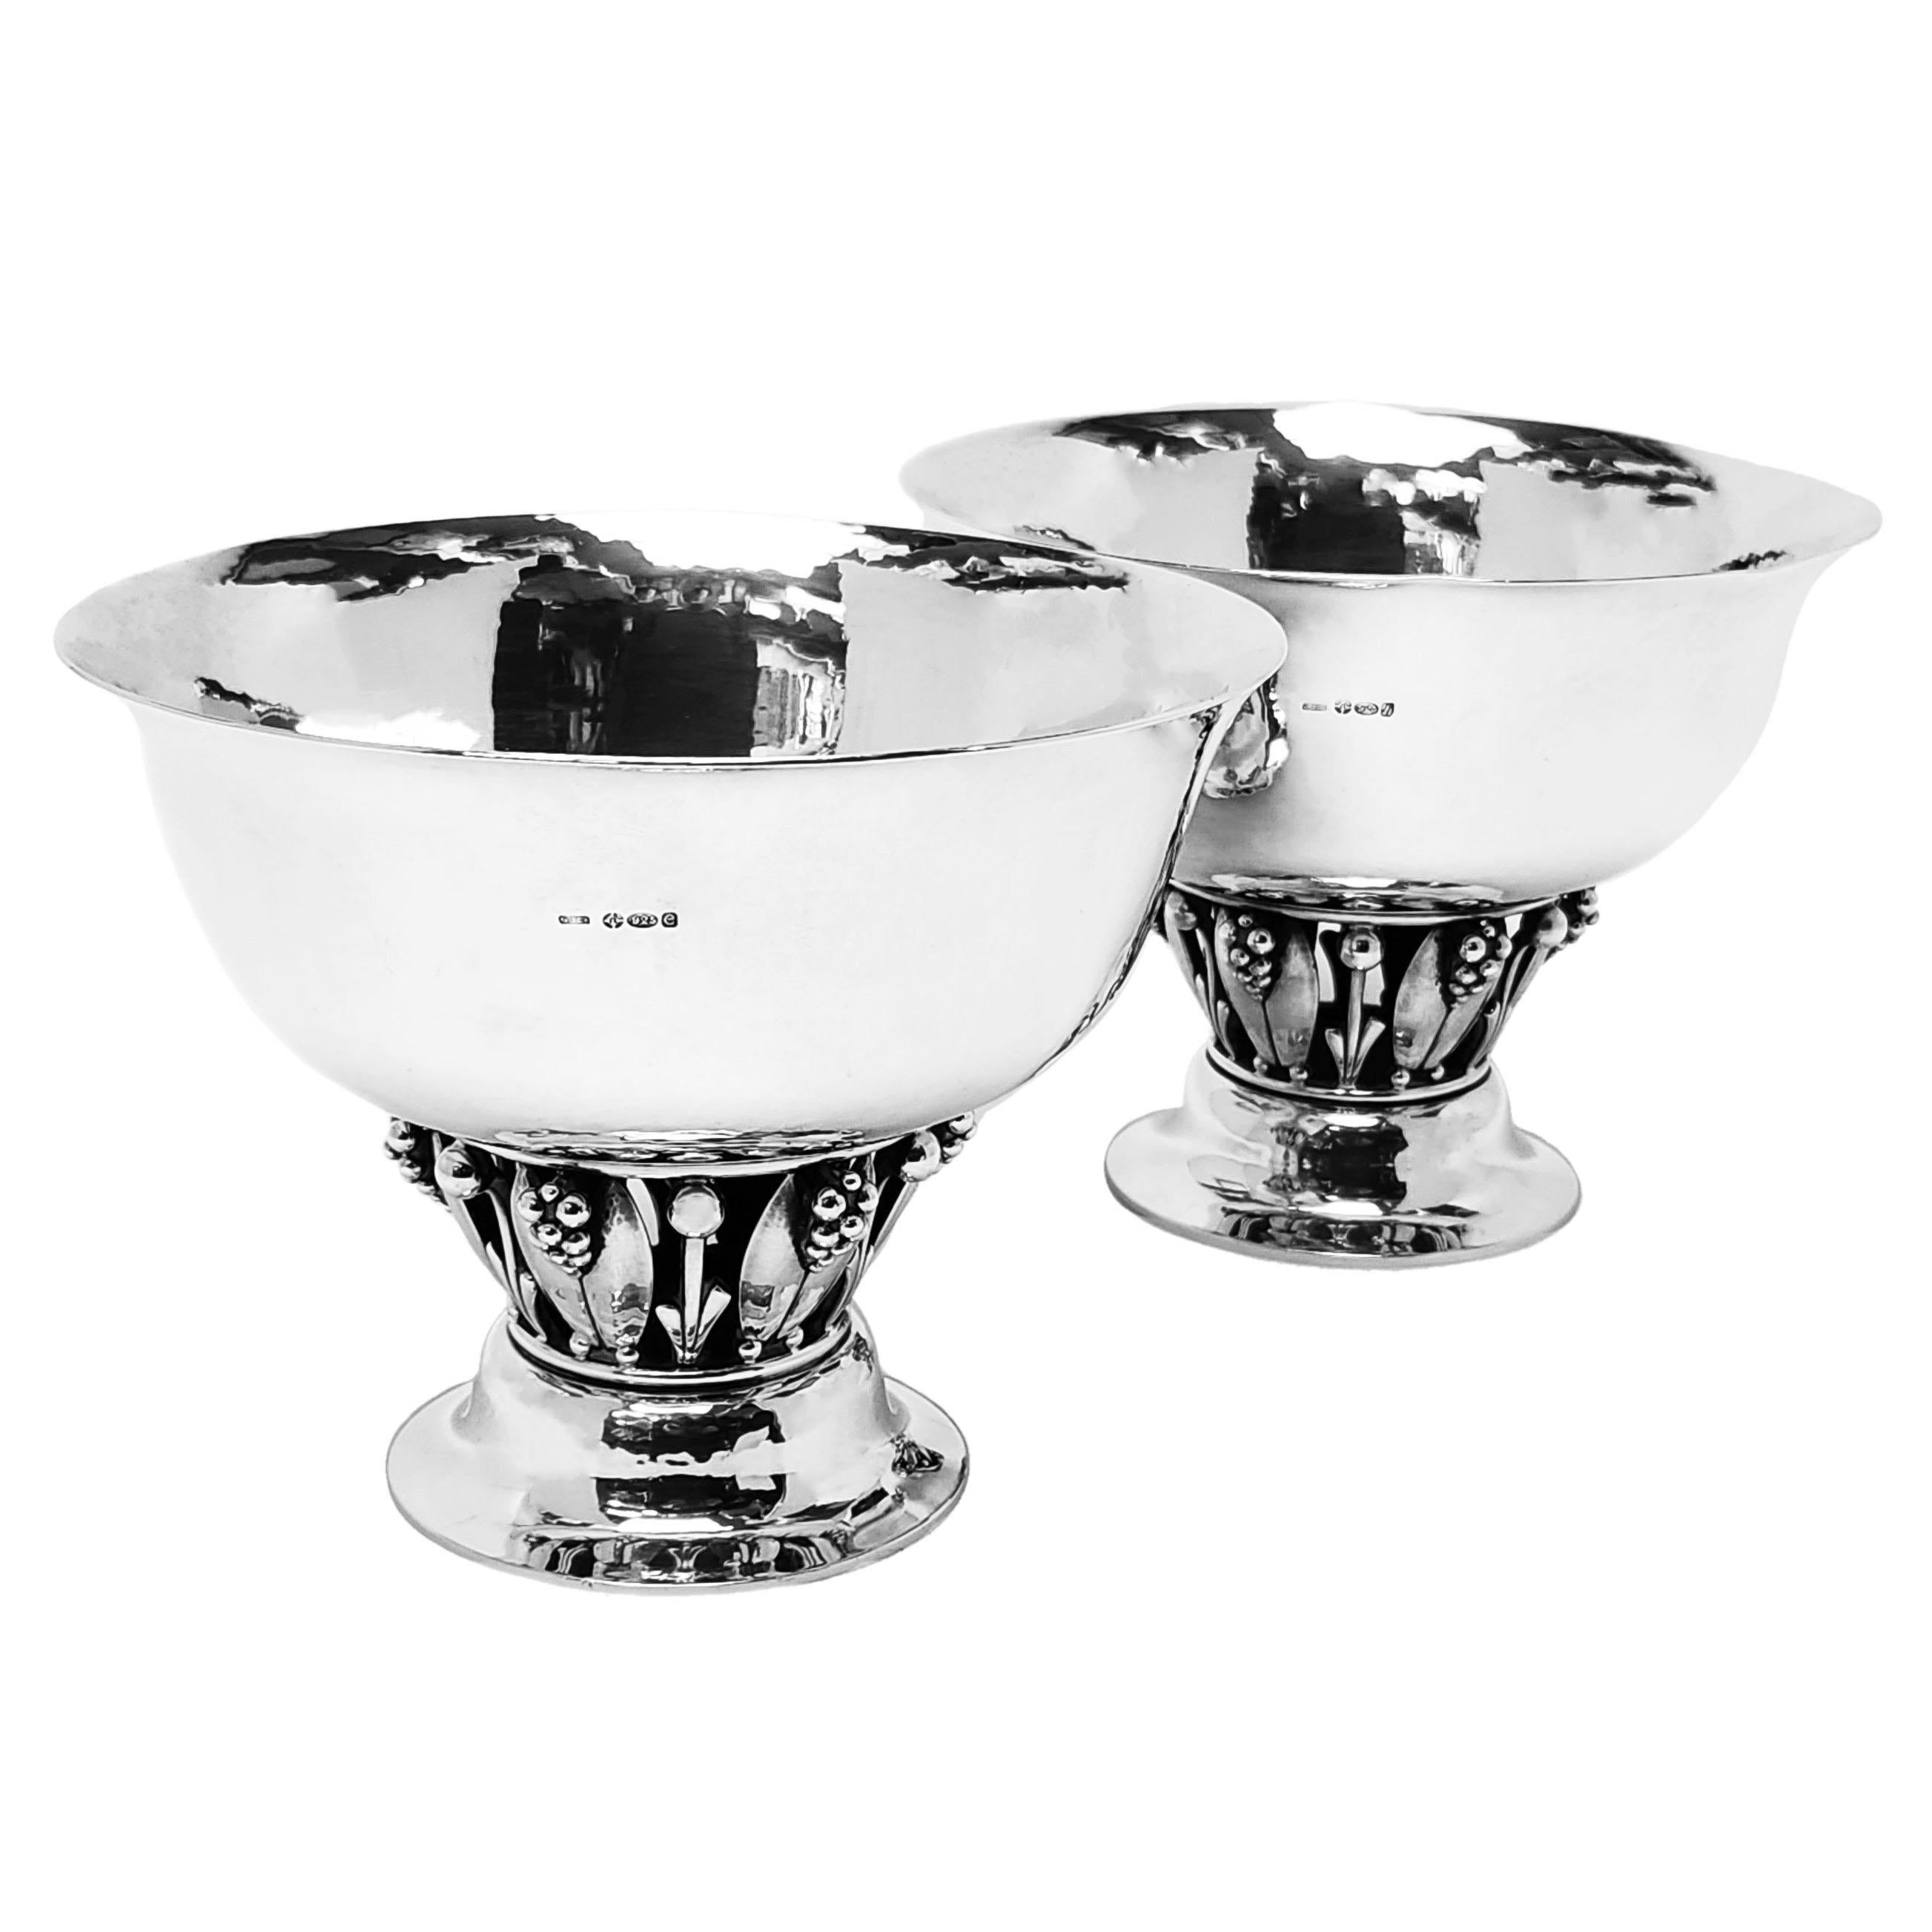 A pair of elegant Sterling Silver Bowls in classic Jensen design pattern 197B. The pair of Bowls are supported on berry and leaf design colons and the bodies of each bowl features a subtle lightly hammered finish.

Made in Copenhagen, Denmark by